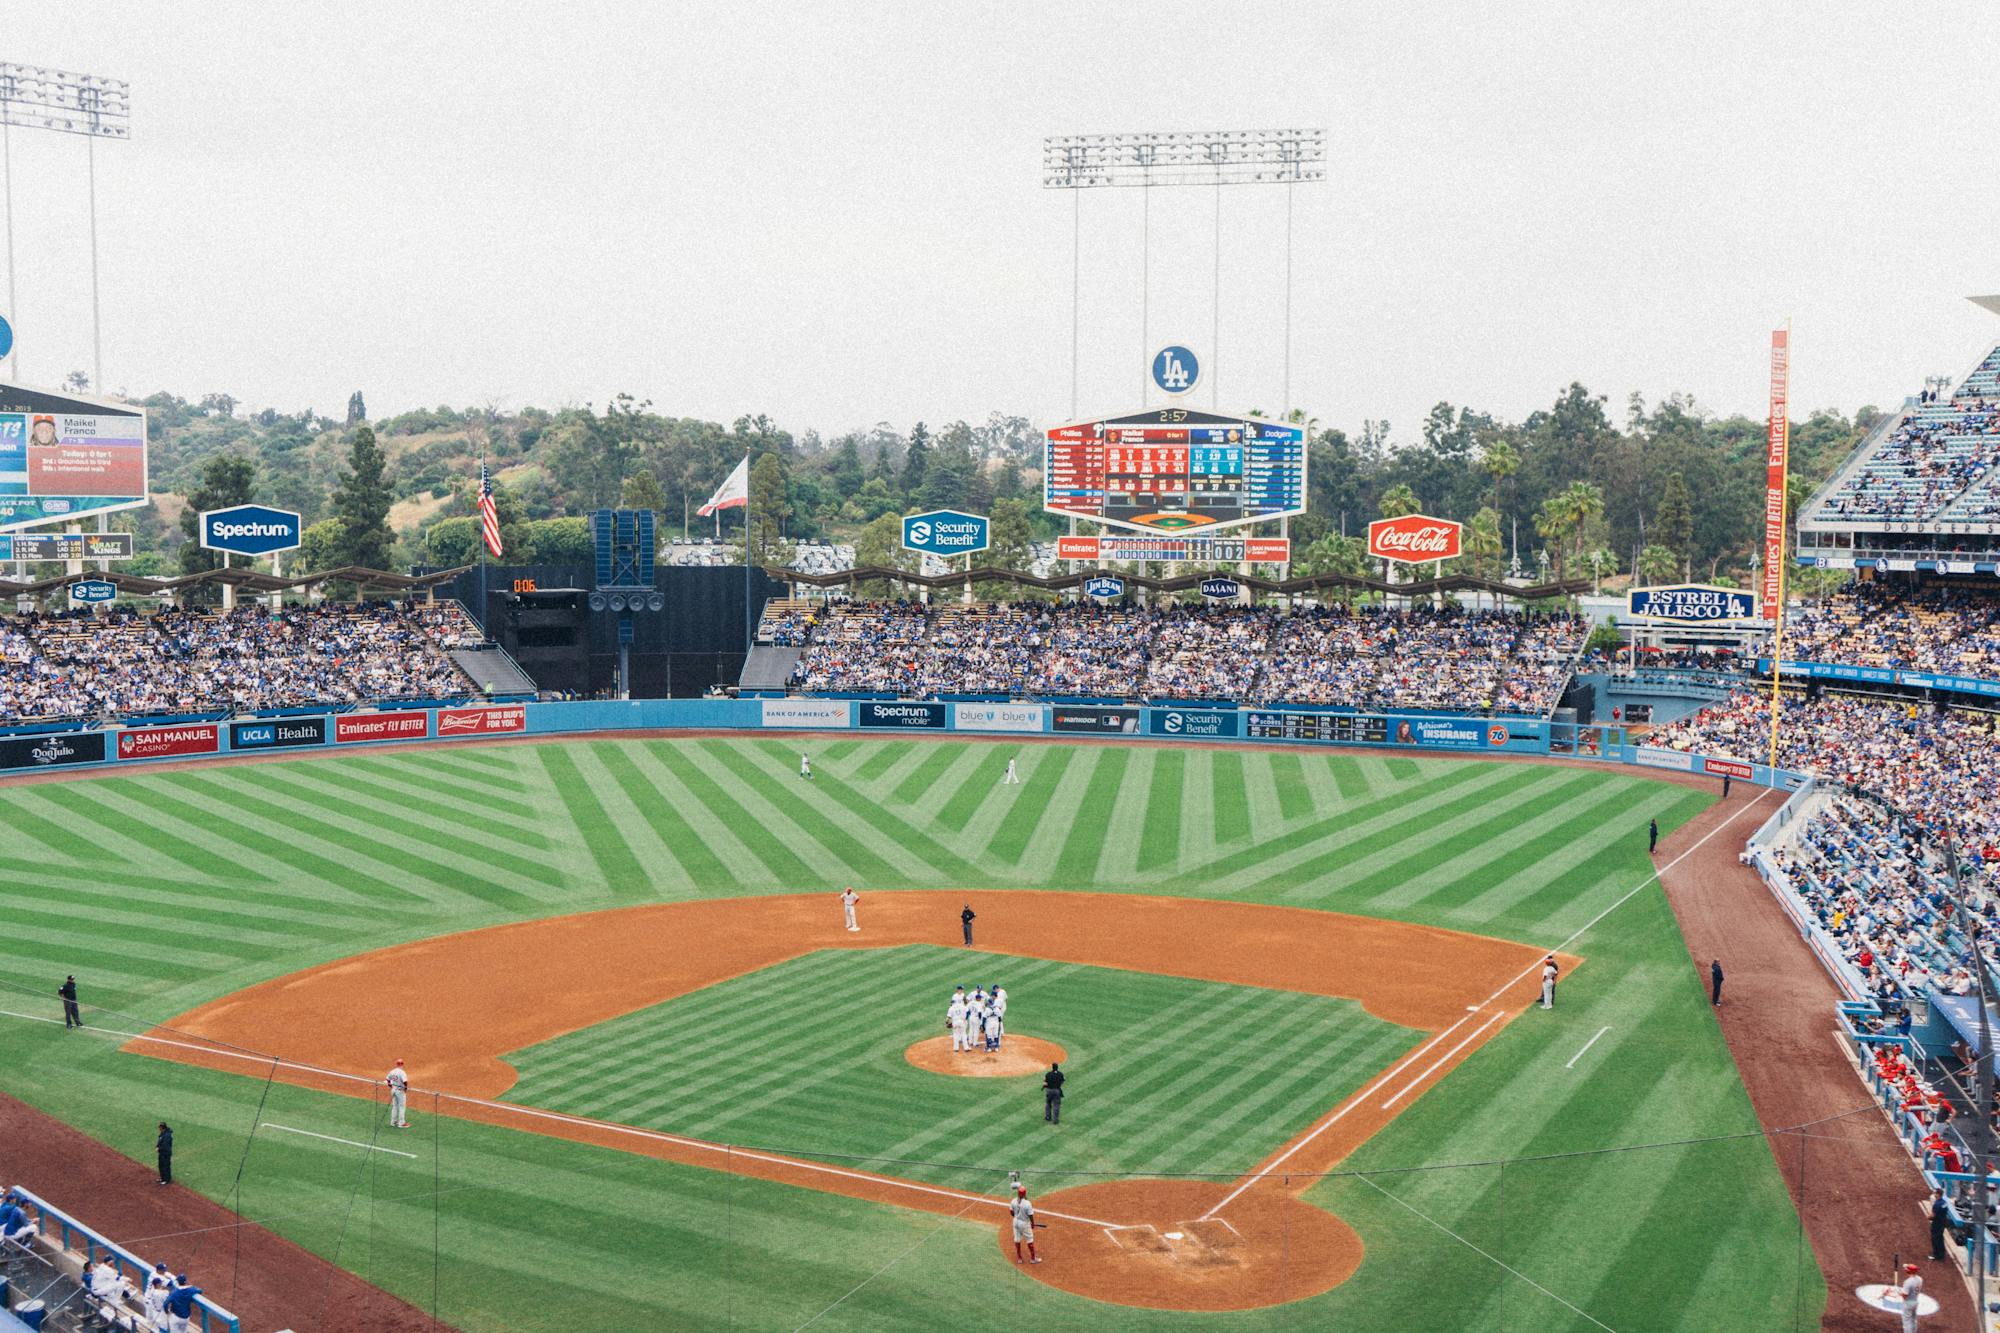 The Dodgers stadium in L.A. 